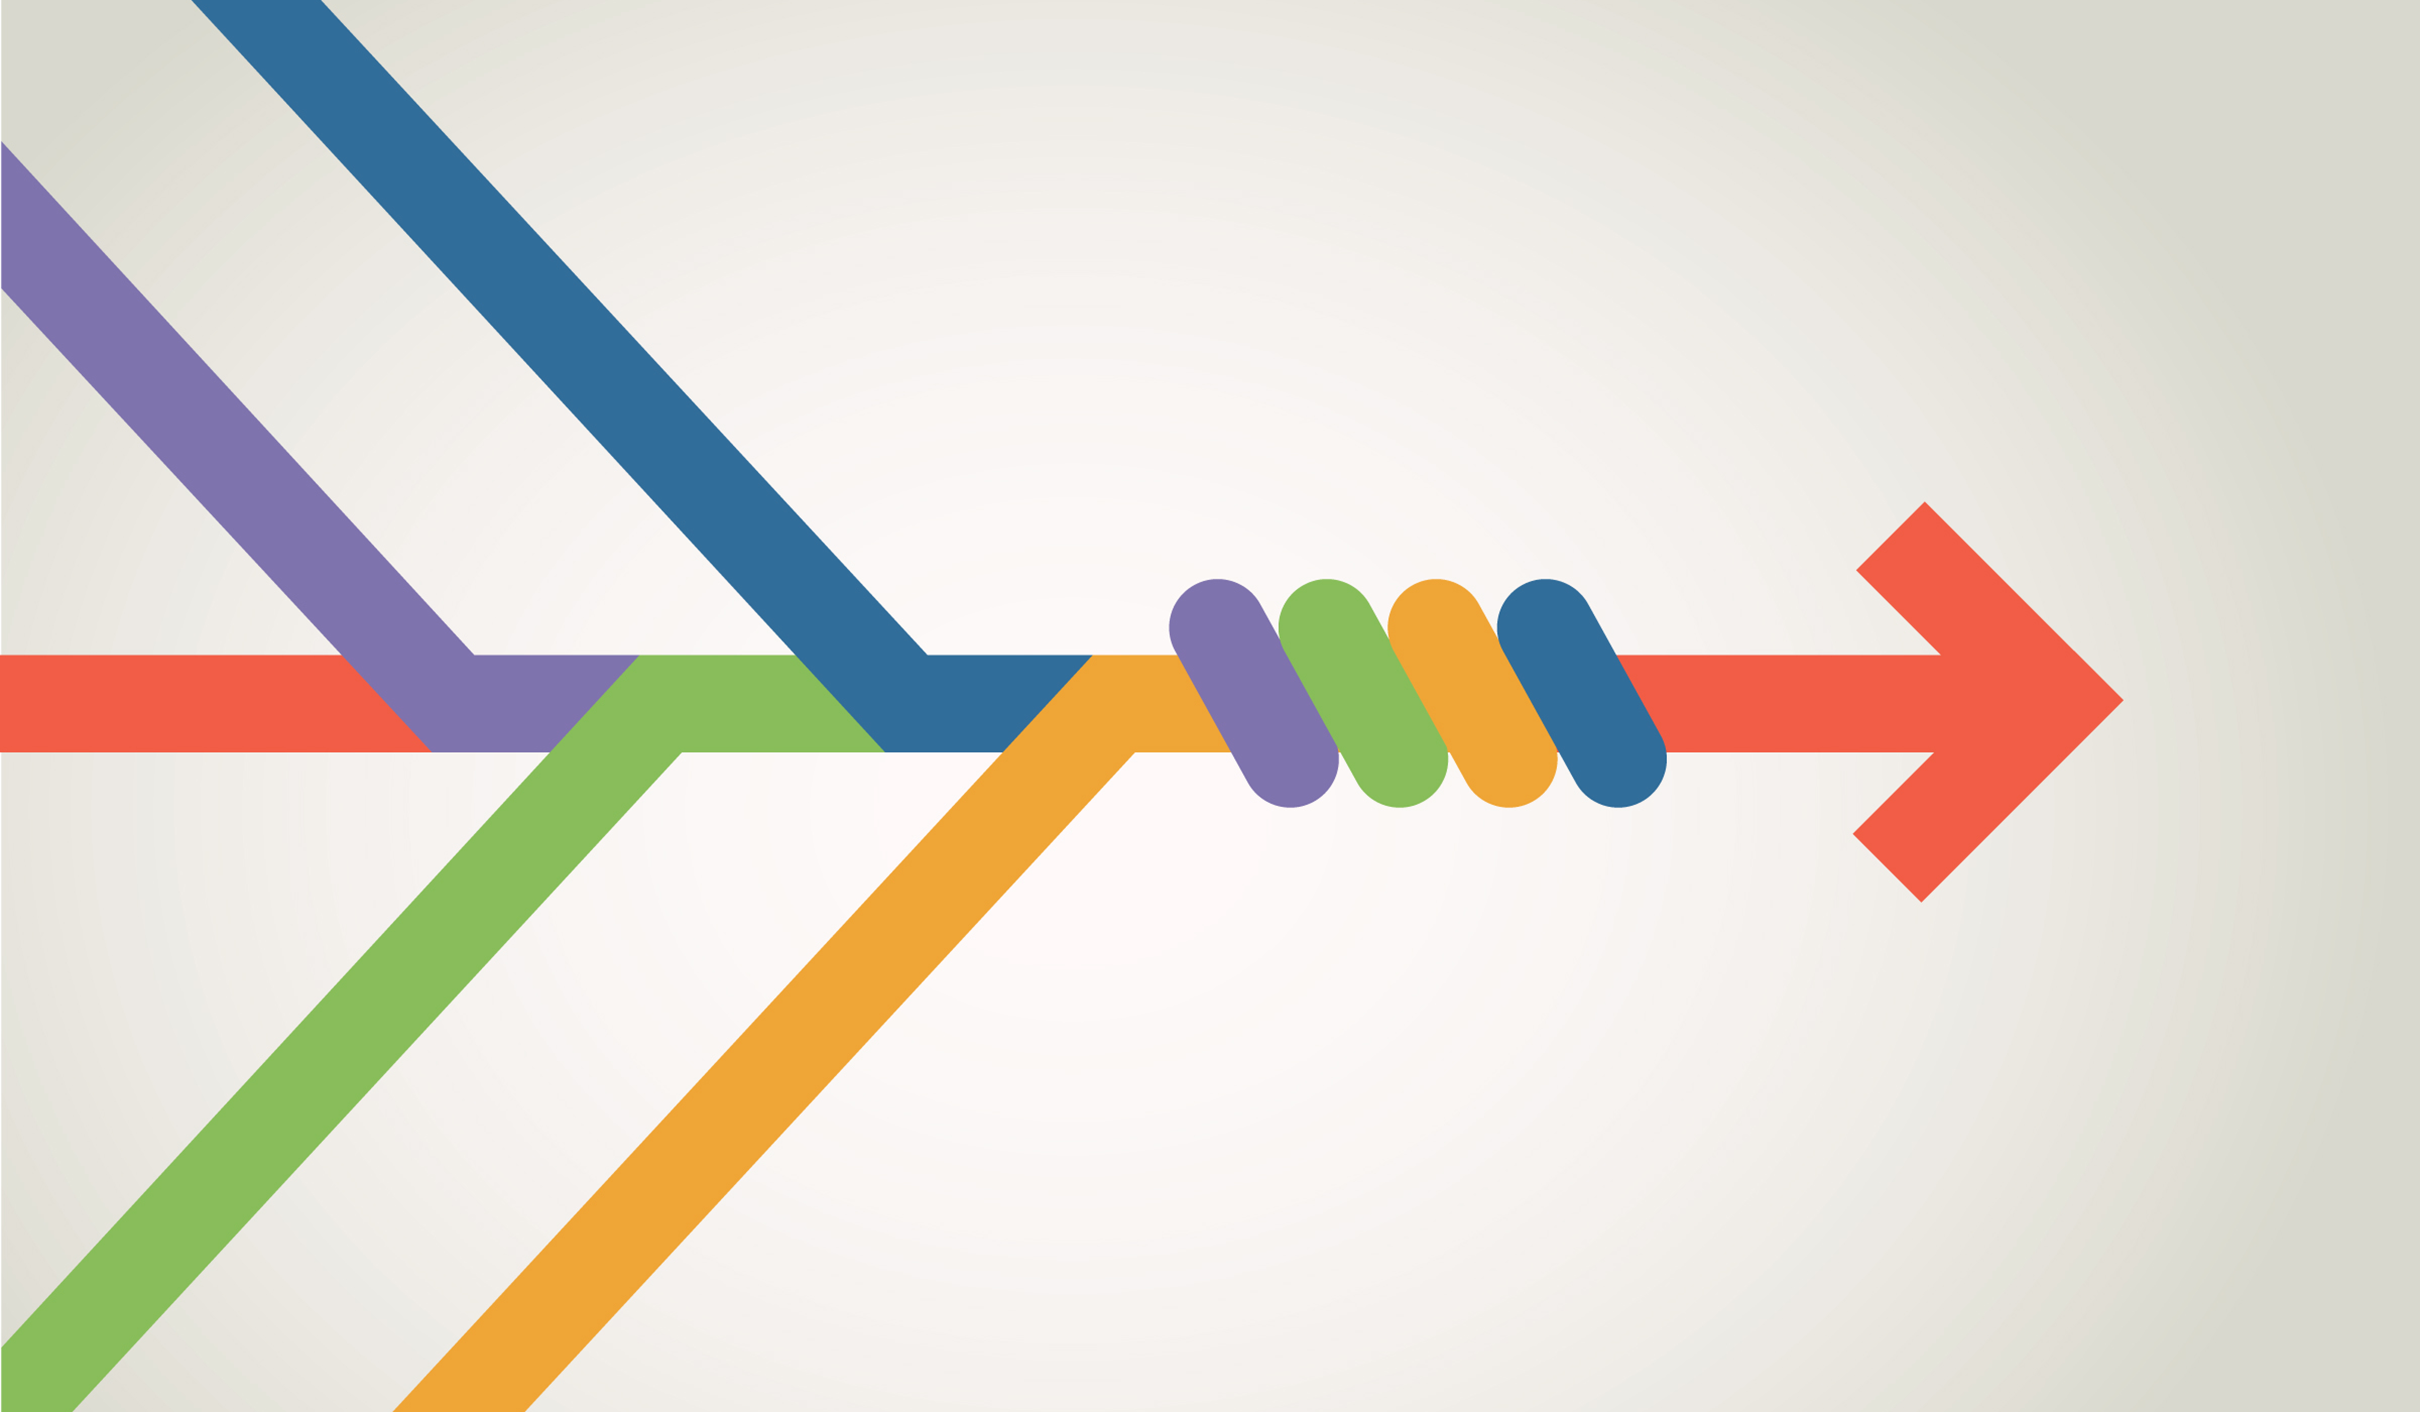 Colorful lines intertwining into a rightwards pointing arrow